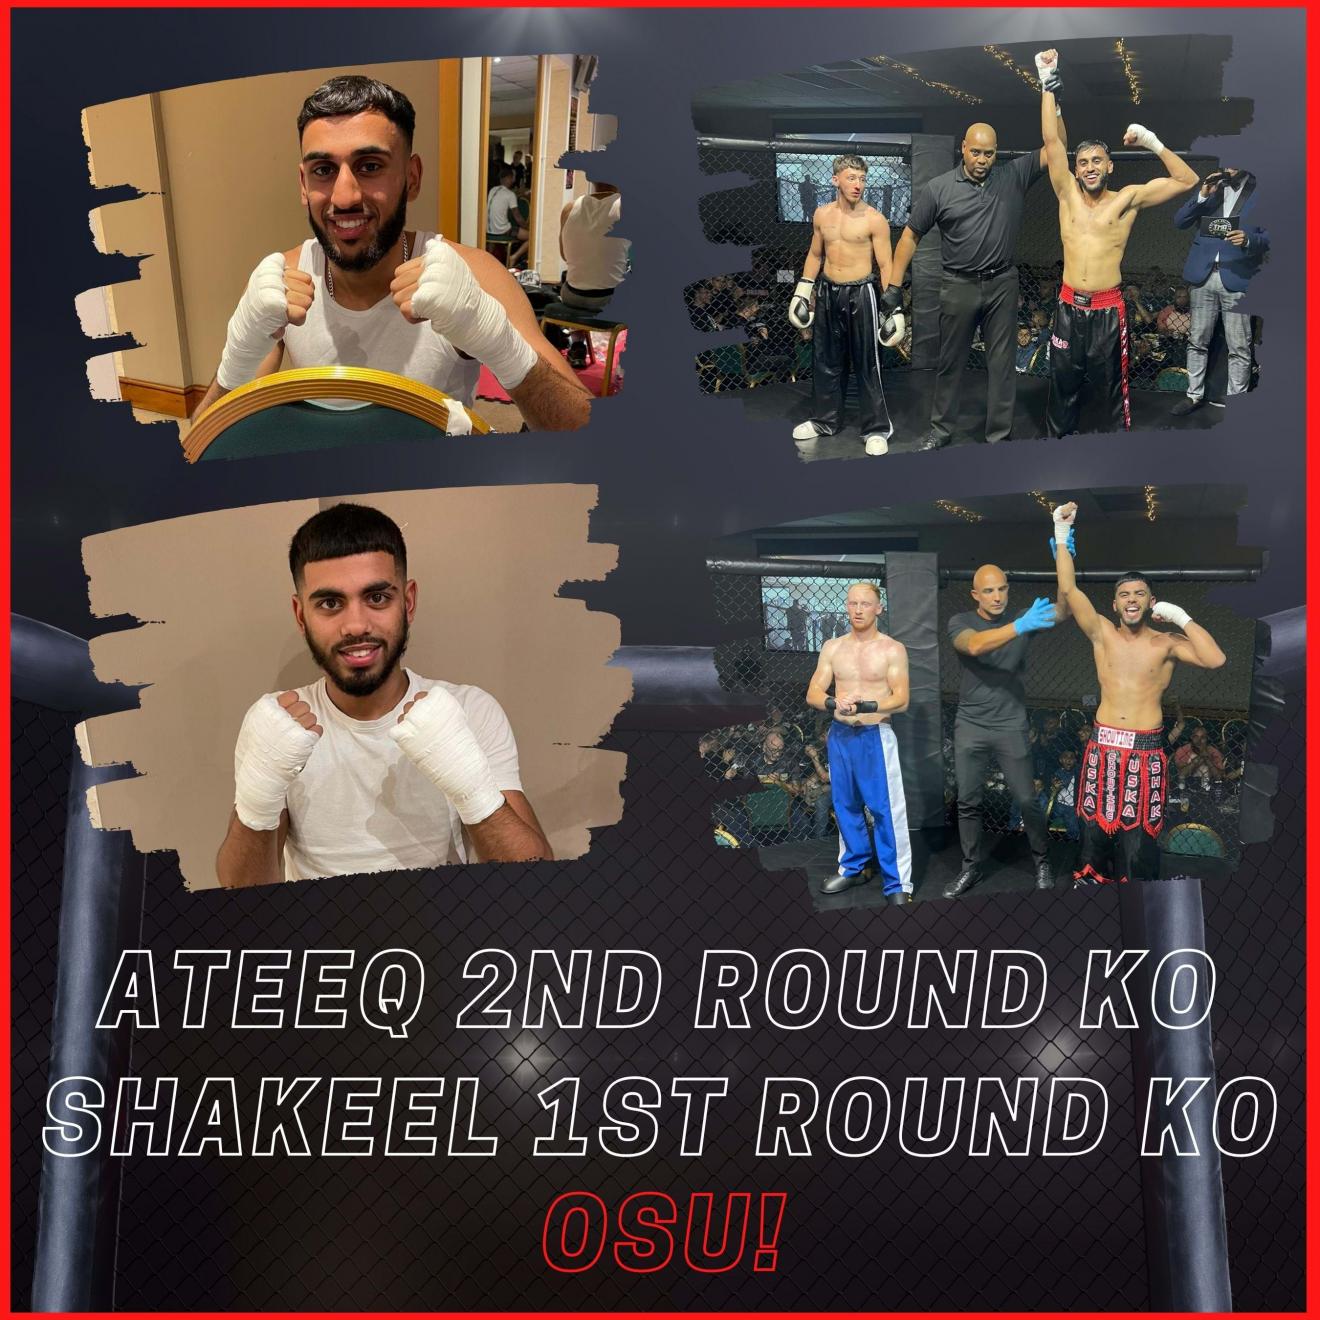 10-09-22 - 2 Fights, 2 Wins, 2 Ko's for Ateeq and Shakeel at the TMA Fight Series Event